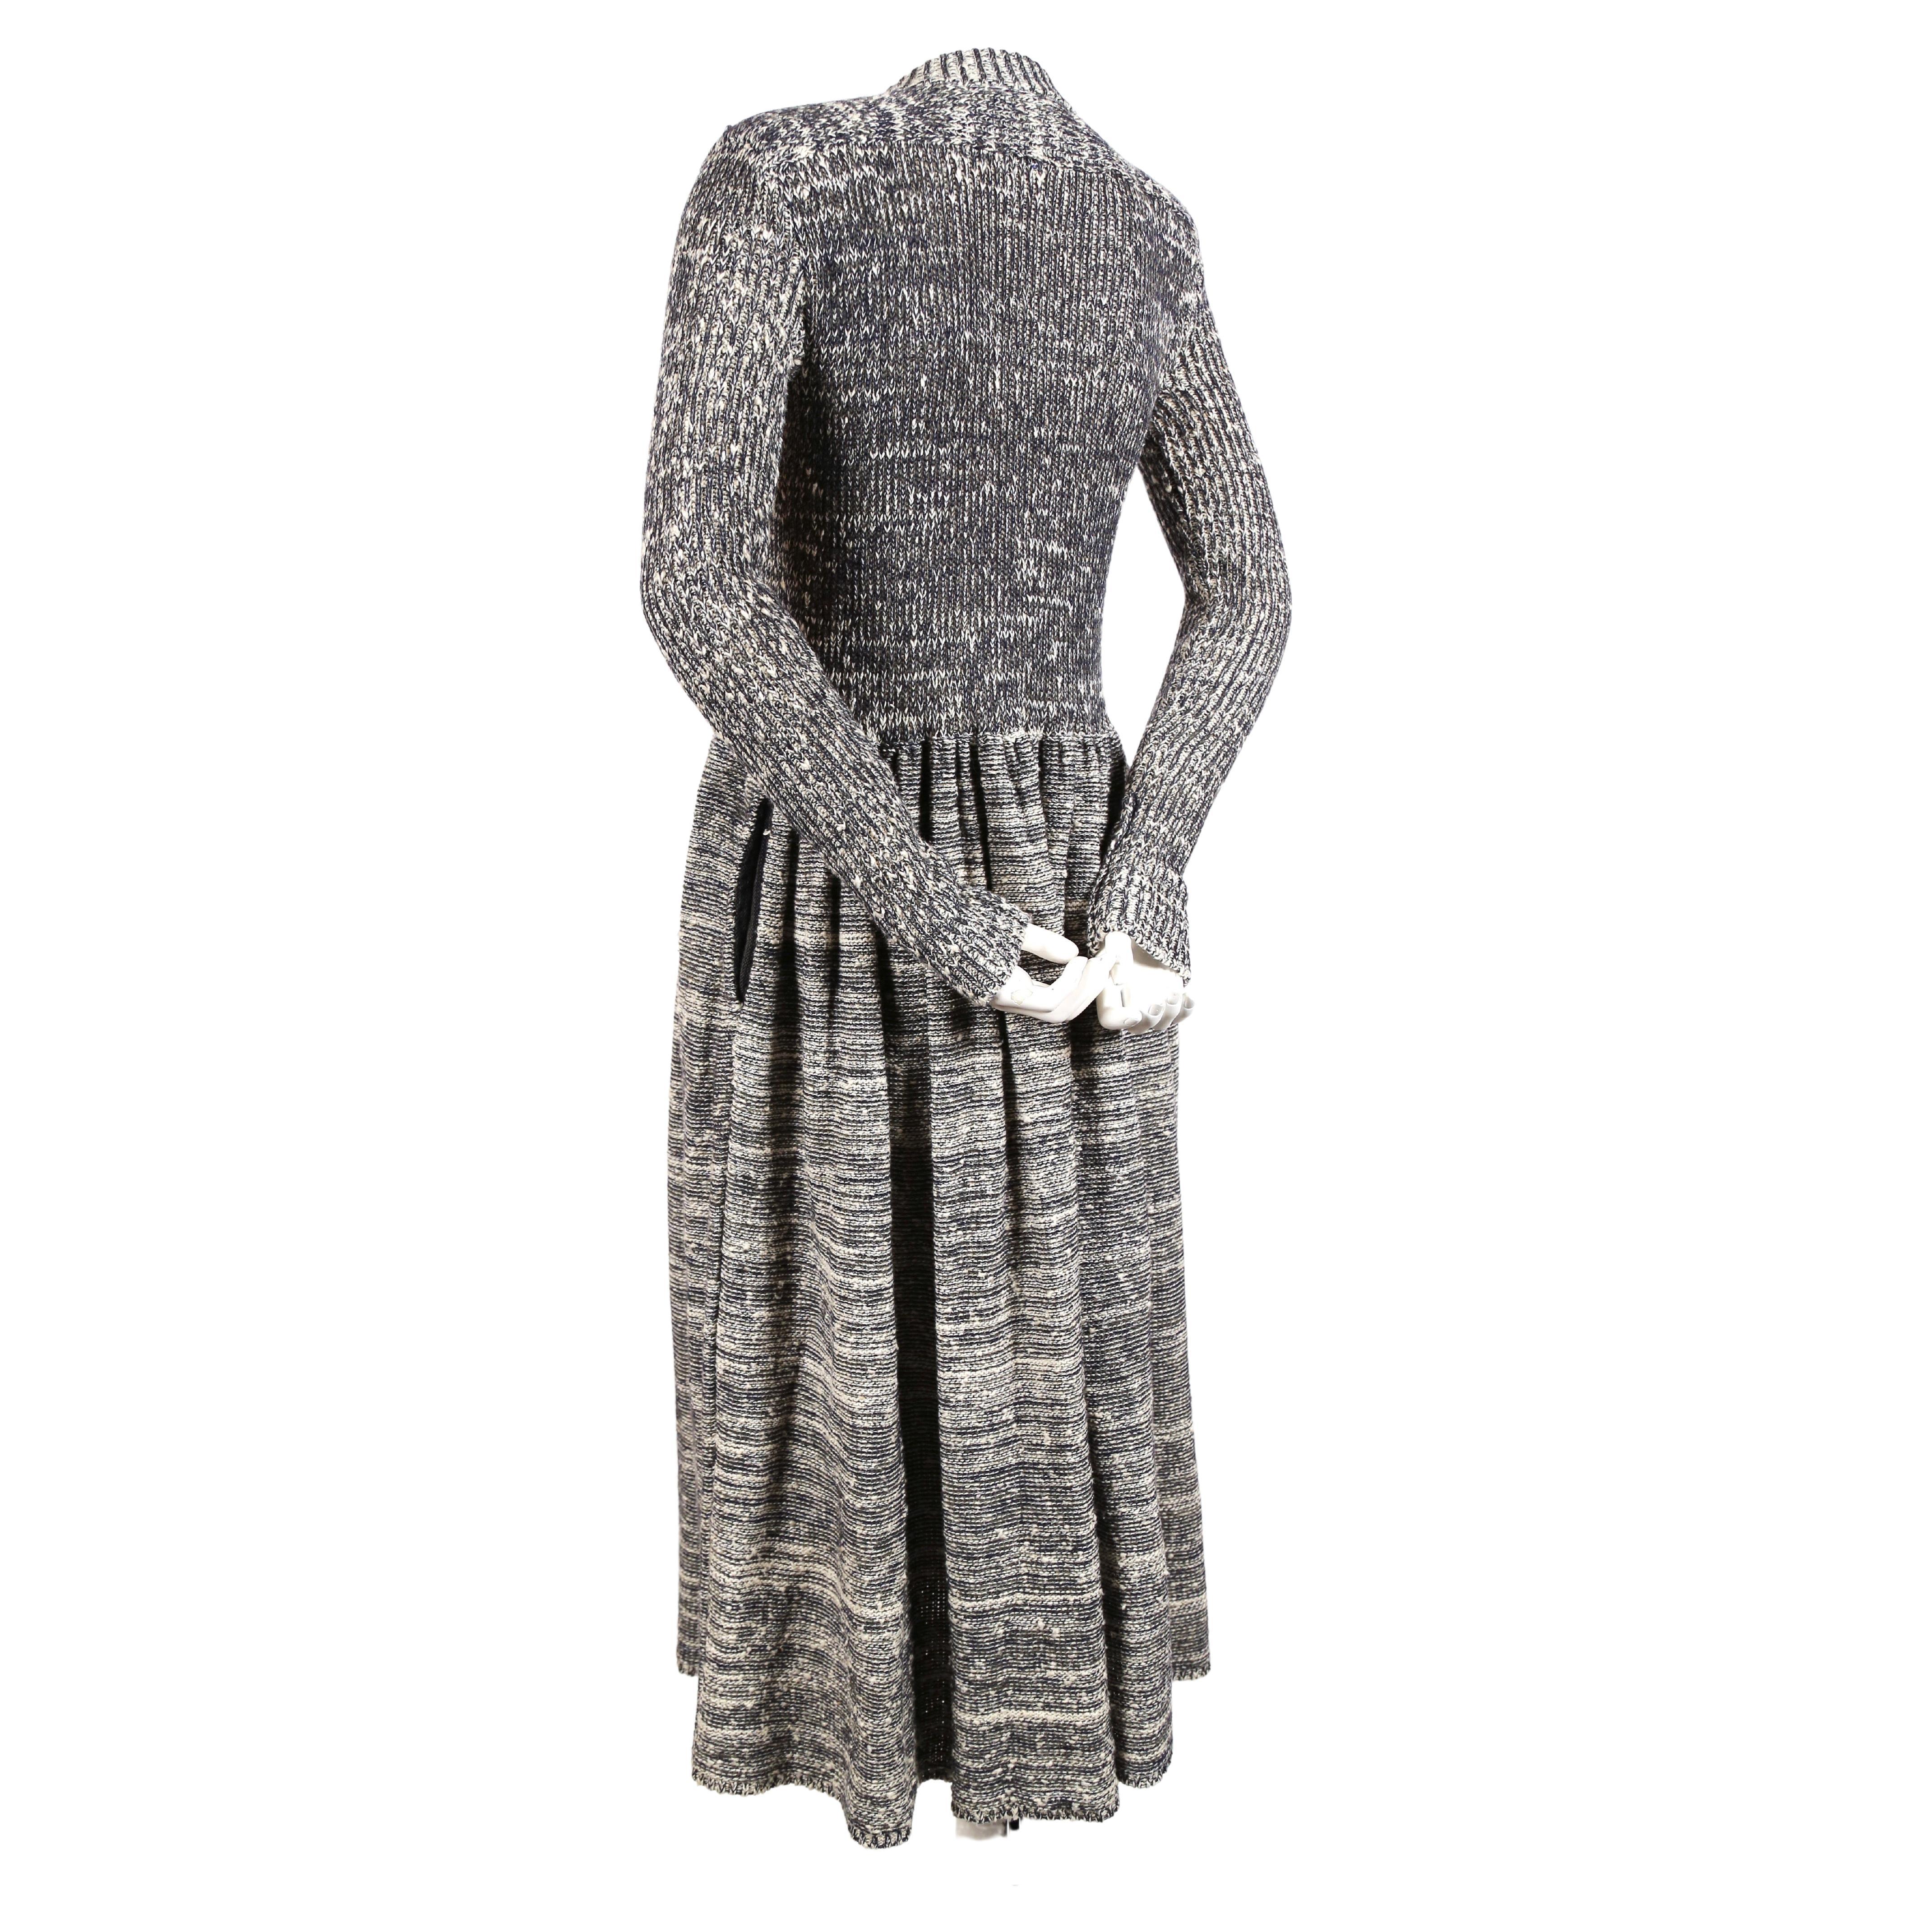 Very rare, blue-grey space dyed knit dress designed by Issey Miyake dating to fall of 1974 as documented in 'Issey Miyake: East Meets West'. Labeled a Japanese size 'M'. This would also fit US XS or S. Approximate measurements: bust (unstretched)